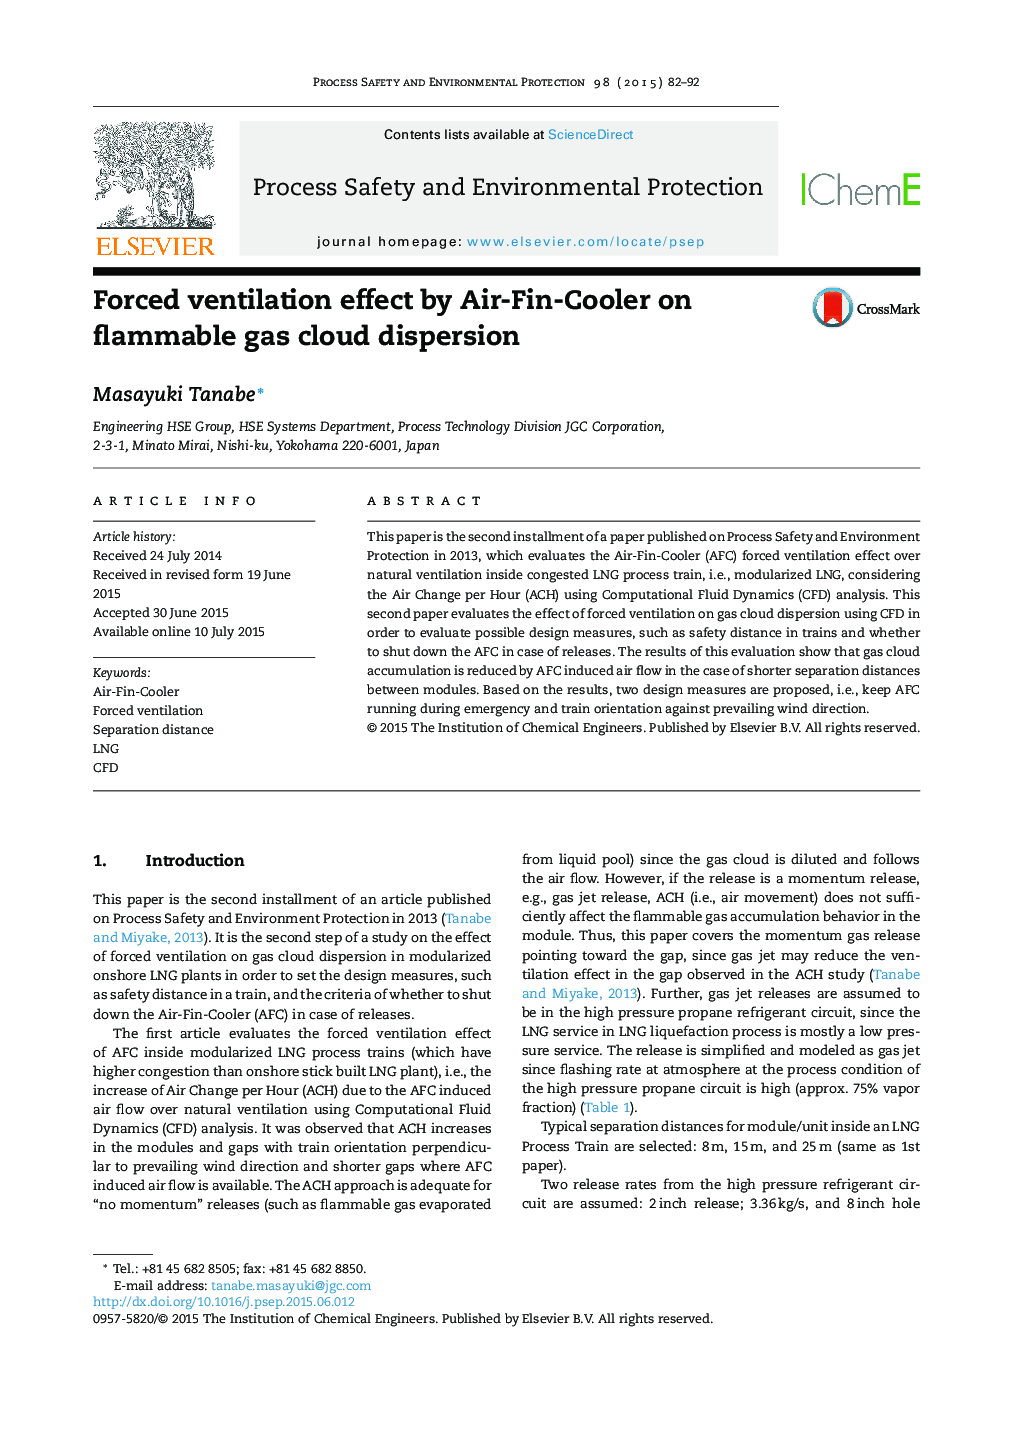 Forced ventilation effect by Air-Fin-Cooler on flammable gas cloud dispersion